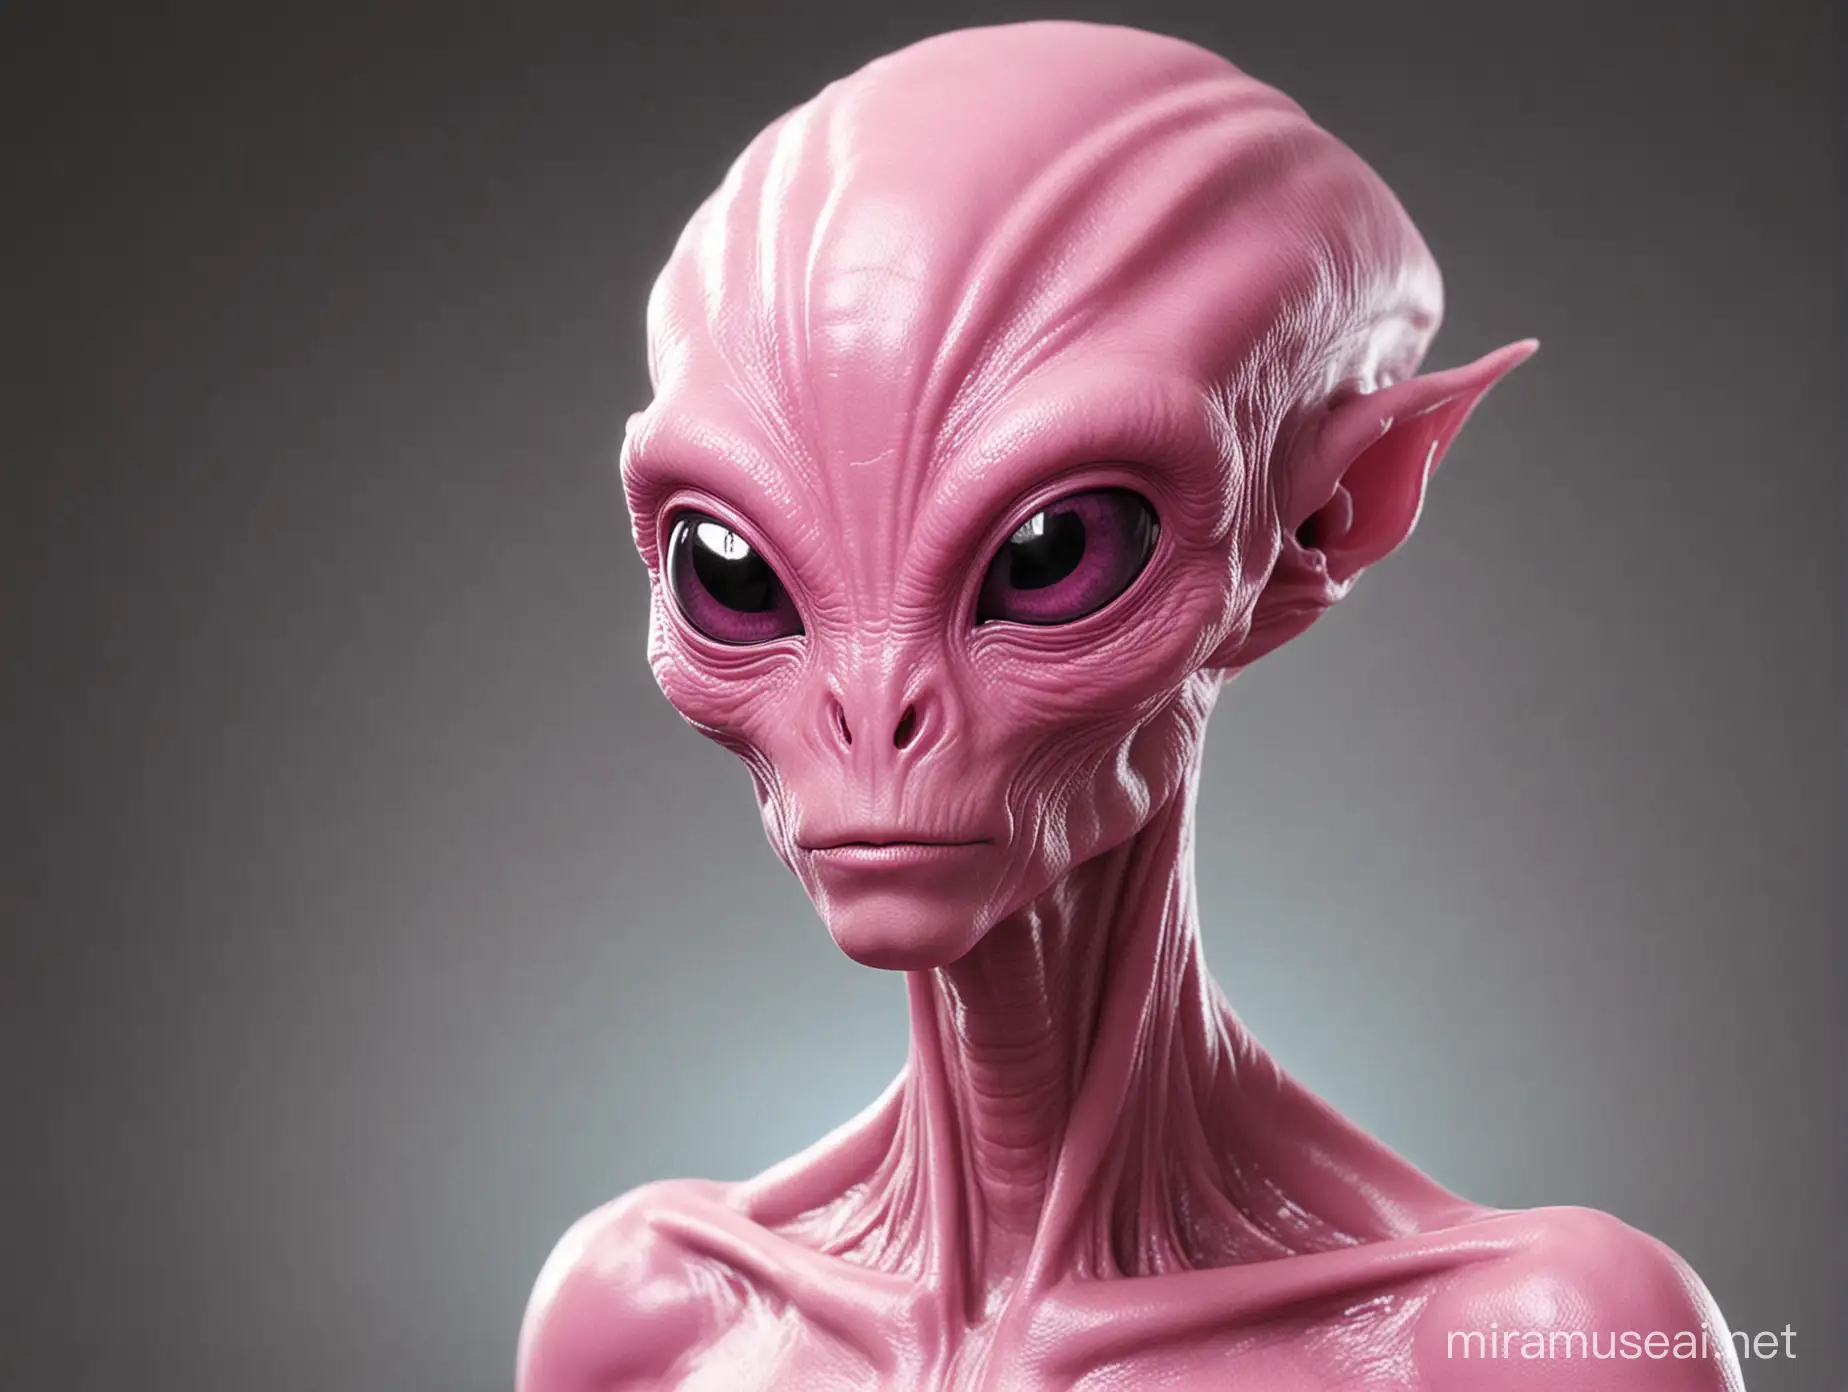 Cute Pink Alien with Sparkling Eyes in Cosmic Playground